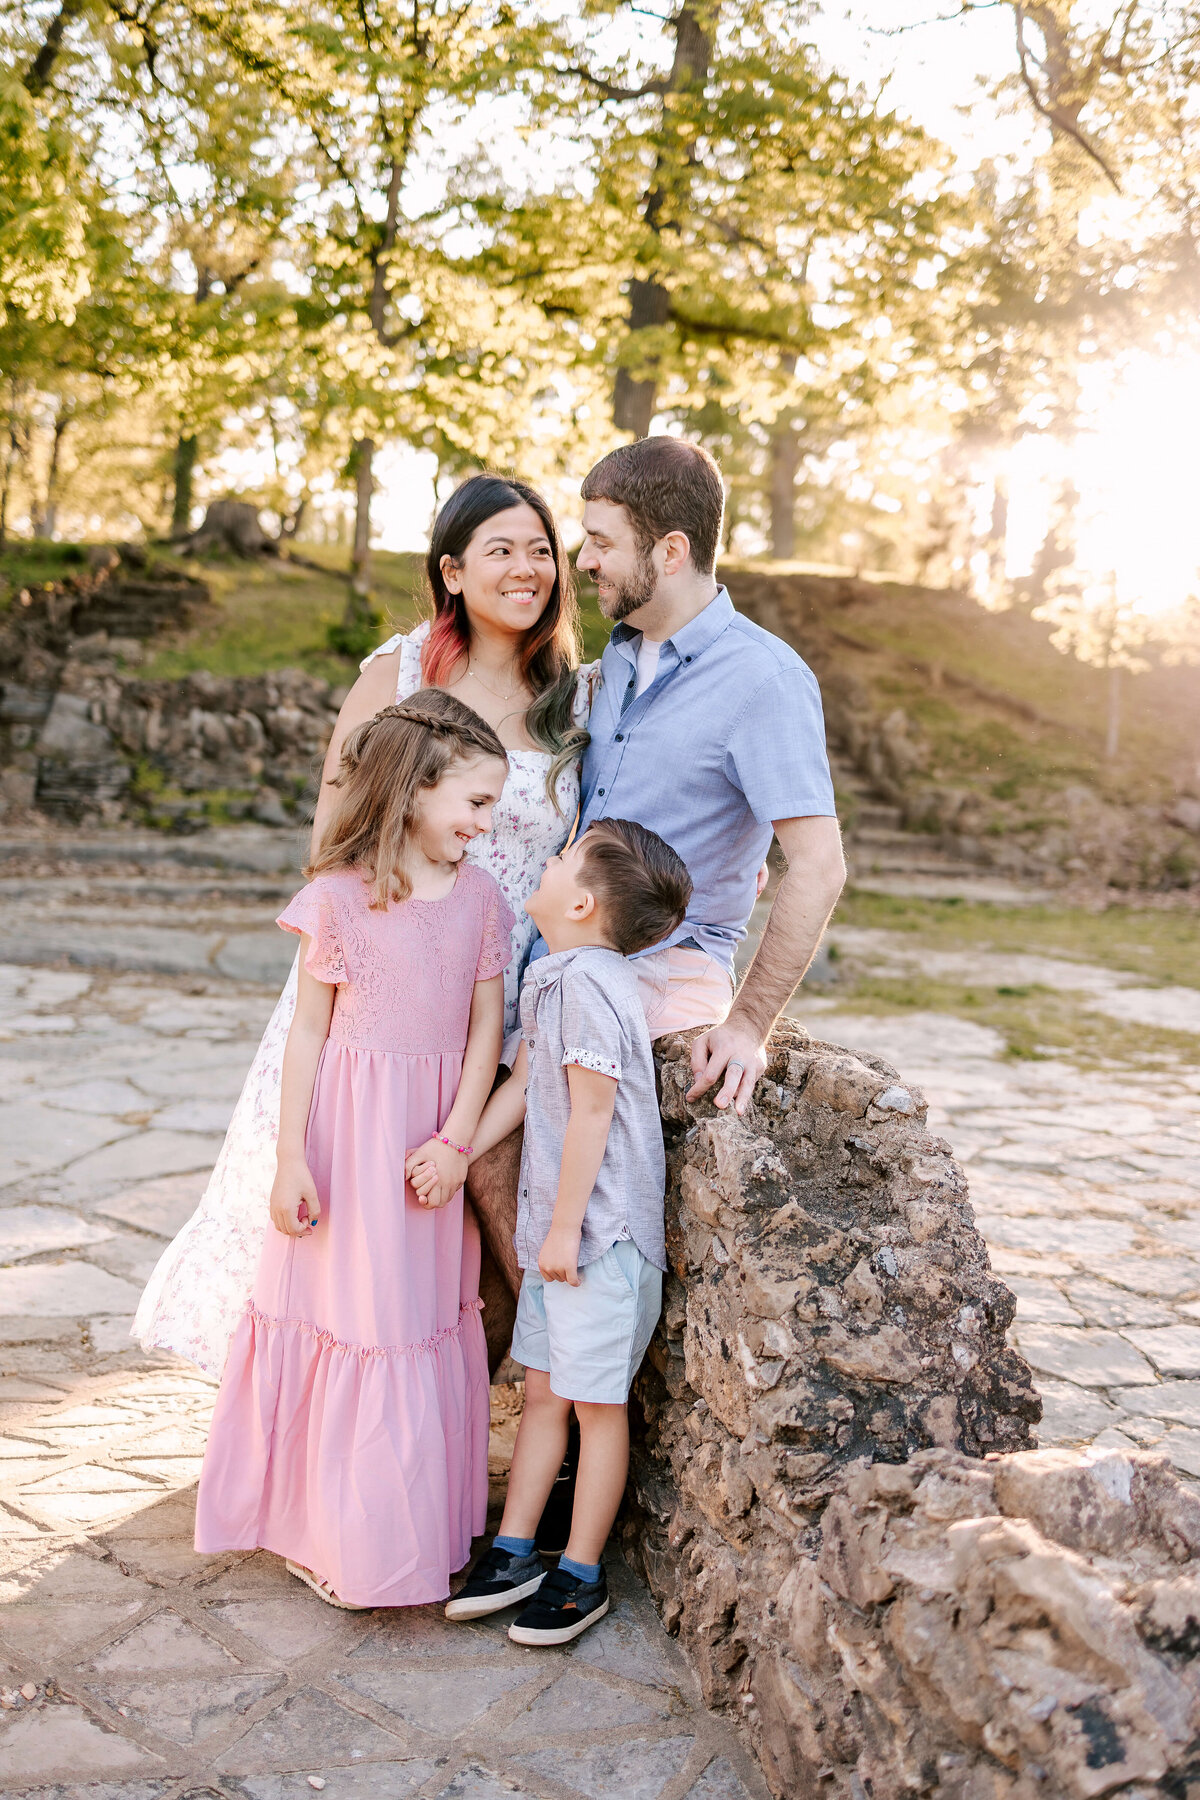 Gorgeous family of four at Silvan Springs park in Oakville, MO at sunset.